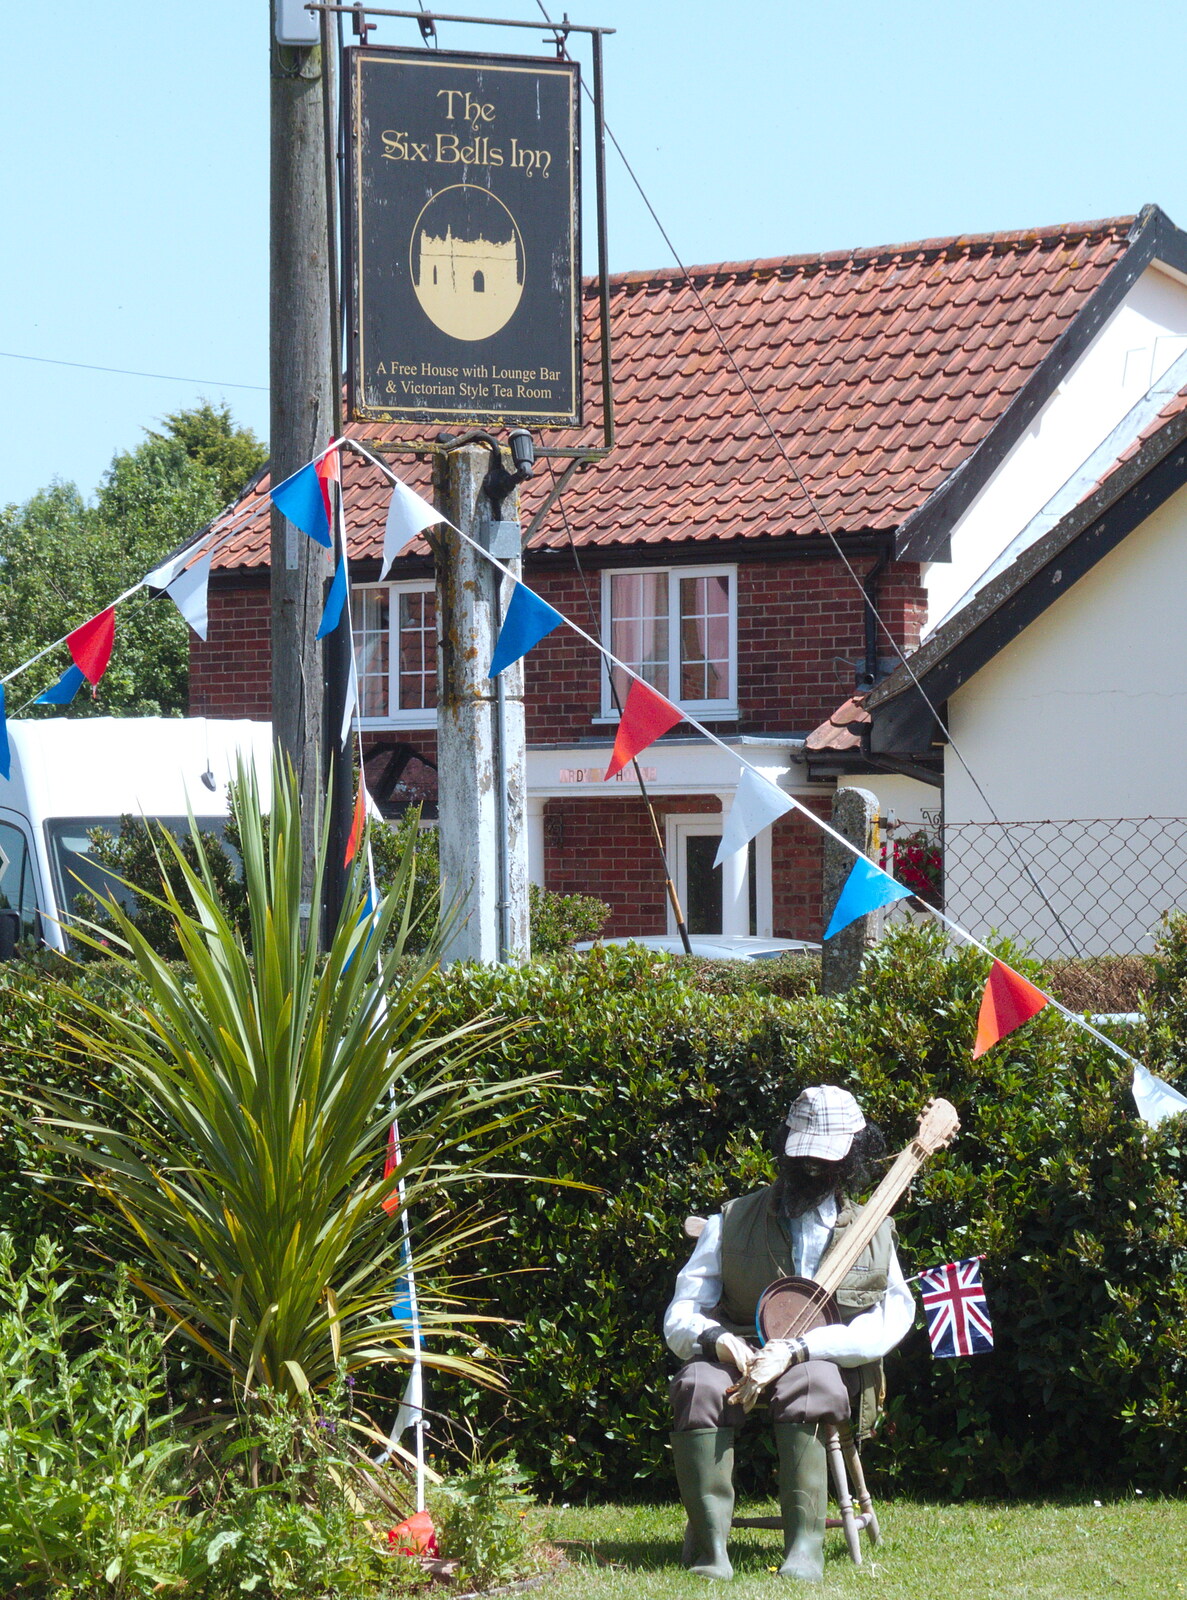 There's a comedy scarecrow with a banjo from GSB and the Gislingham Fete, Suffolk - 29th June 2019